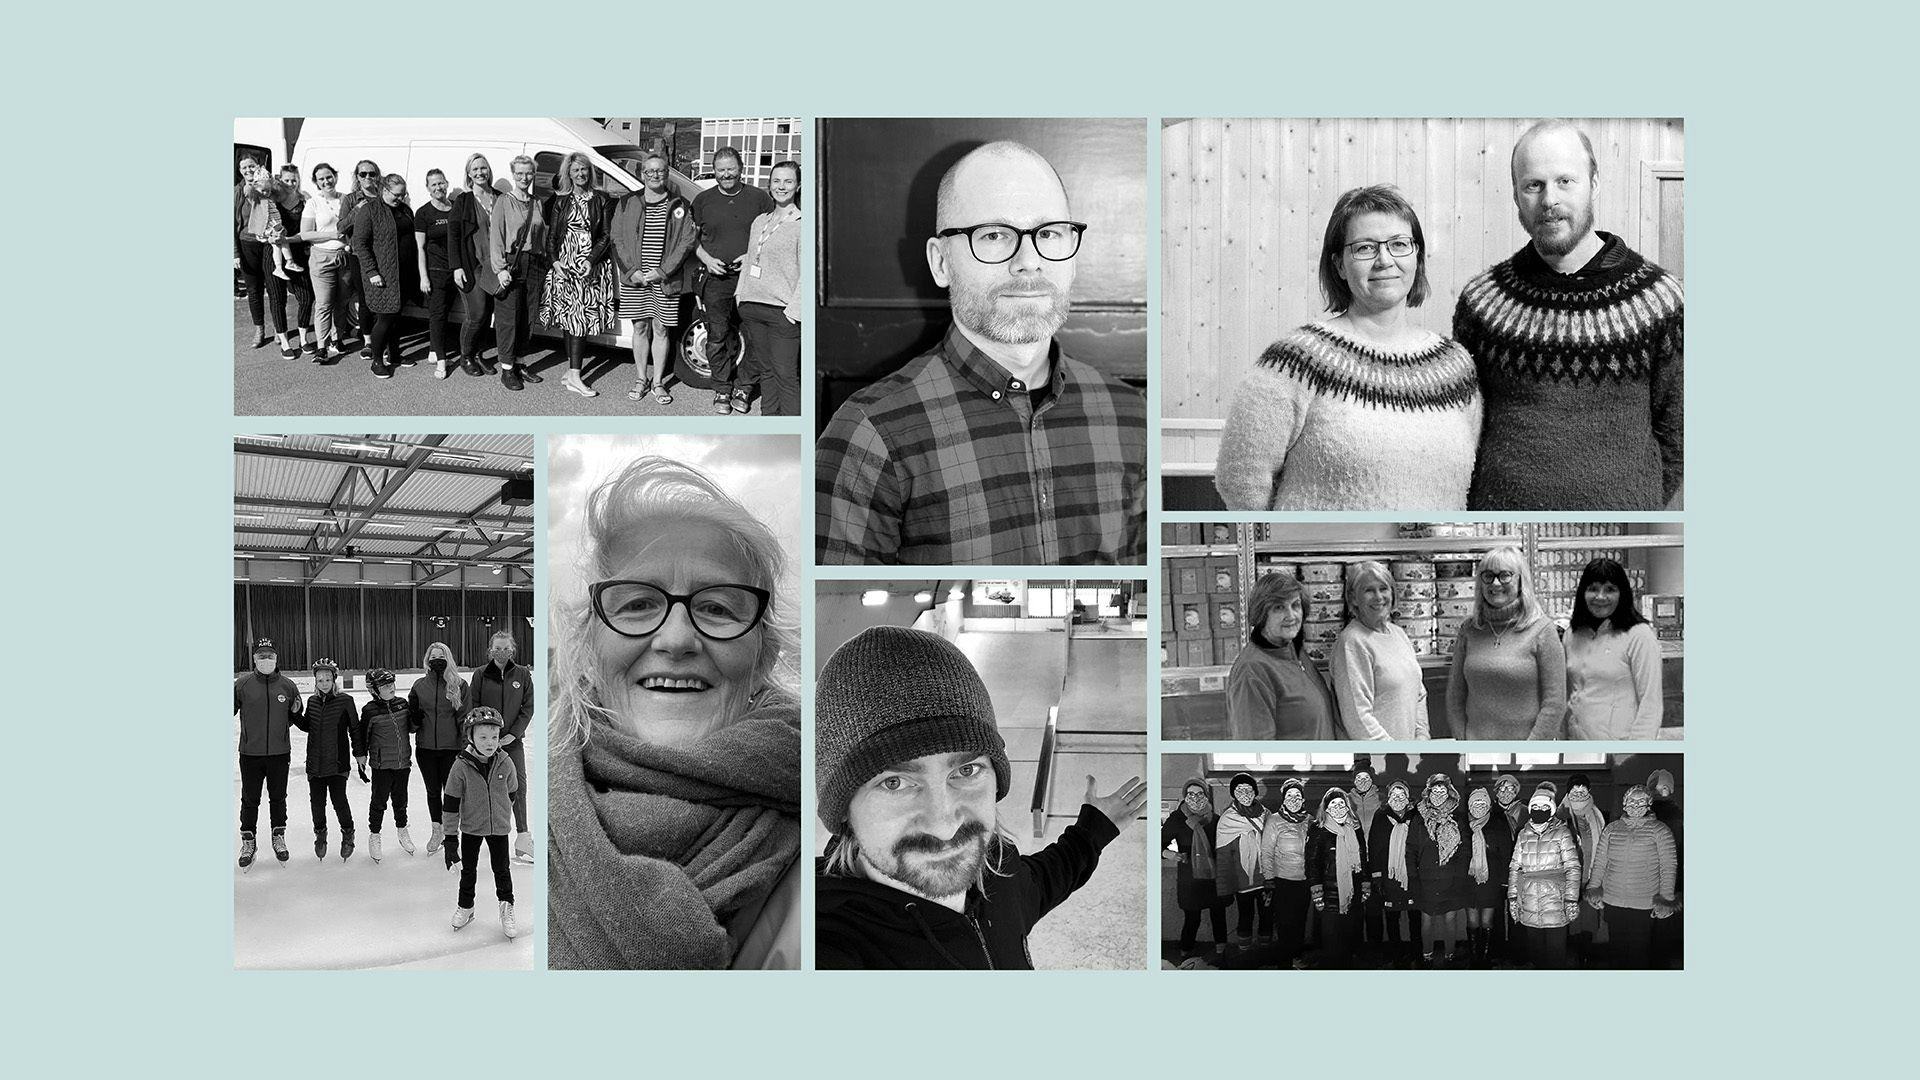 A collage of black and white images featuring various groups of people in different settings such as a team photo, individuals posing and people ice skating